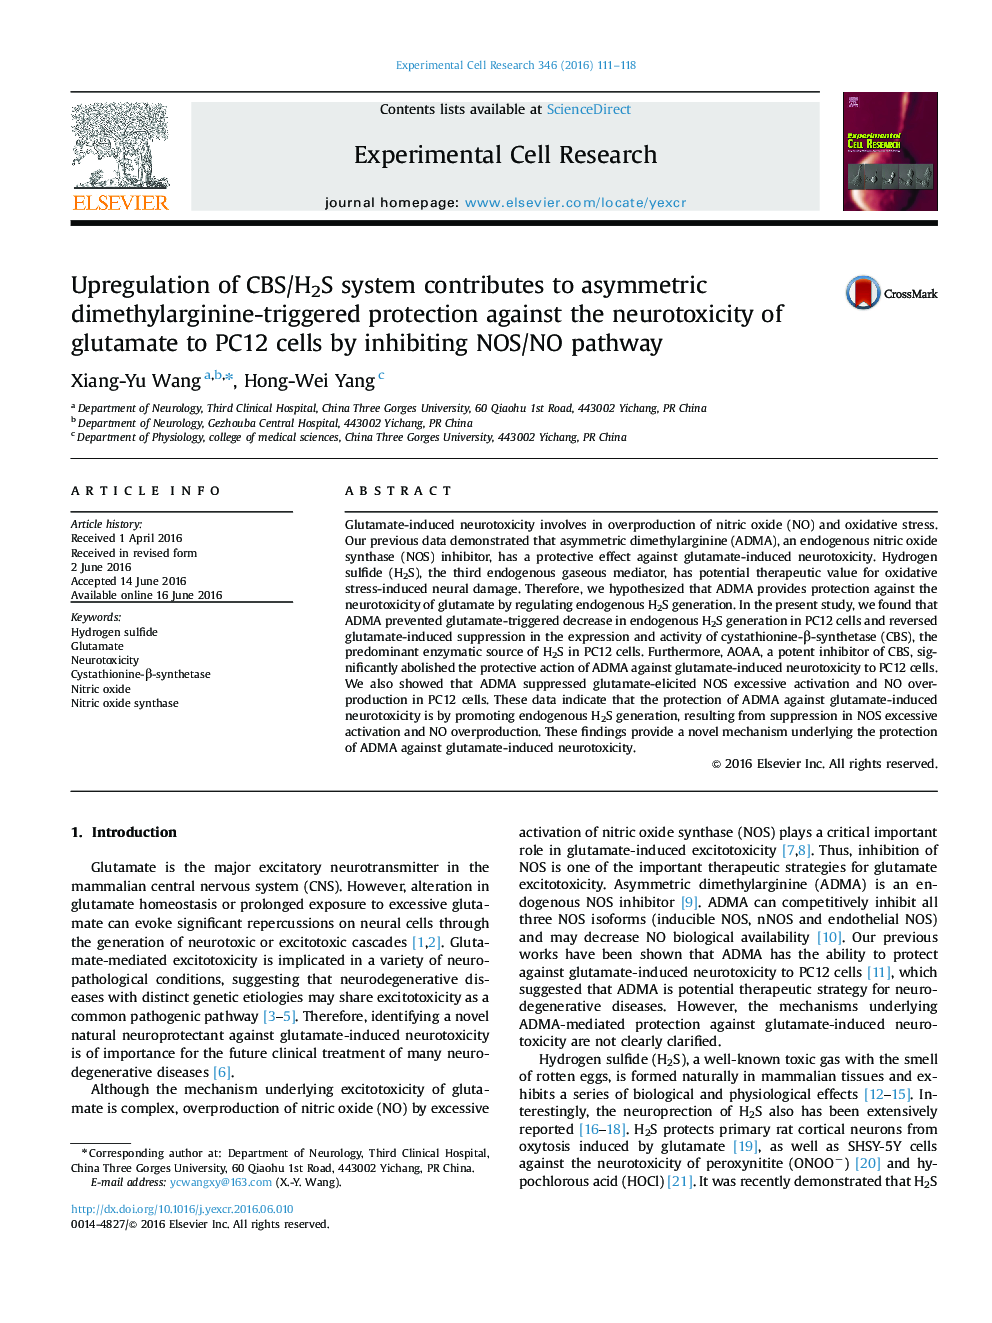 Upregulation of CBS/H2S system contributes to asymmetric dimethylarginine-triggered protection against the neurotoxicity of glutamate to PC12 cells by inhibiting NOS/NO pathway